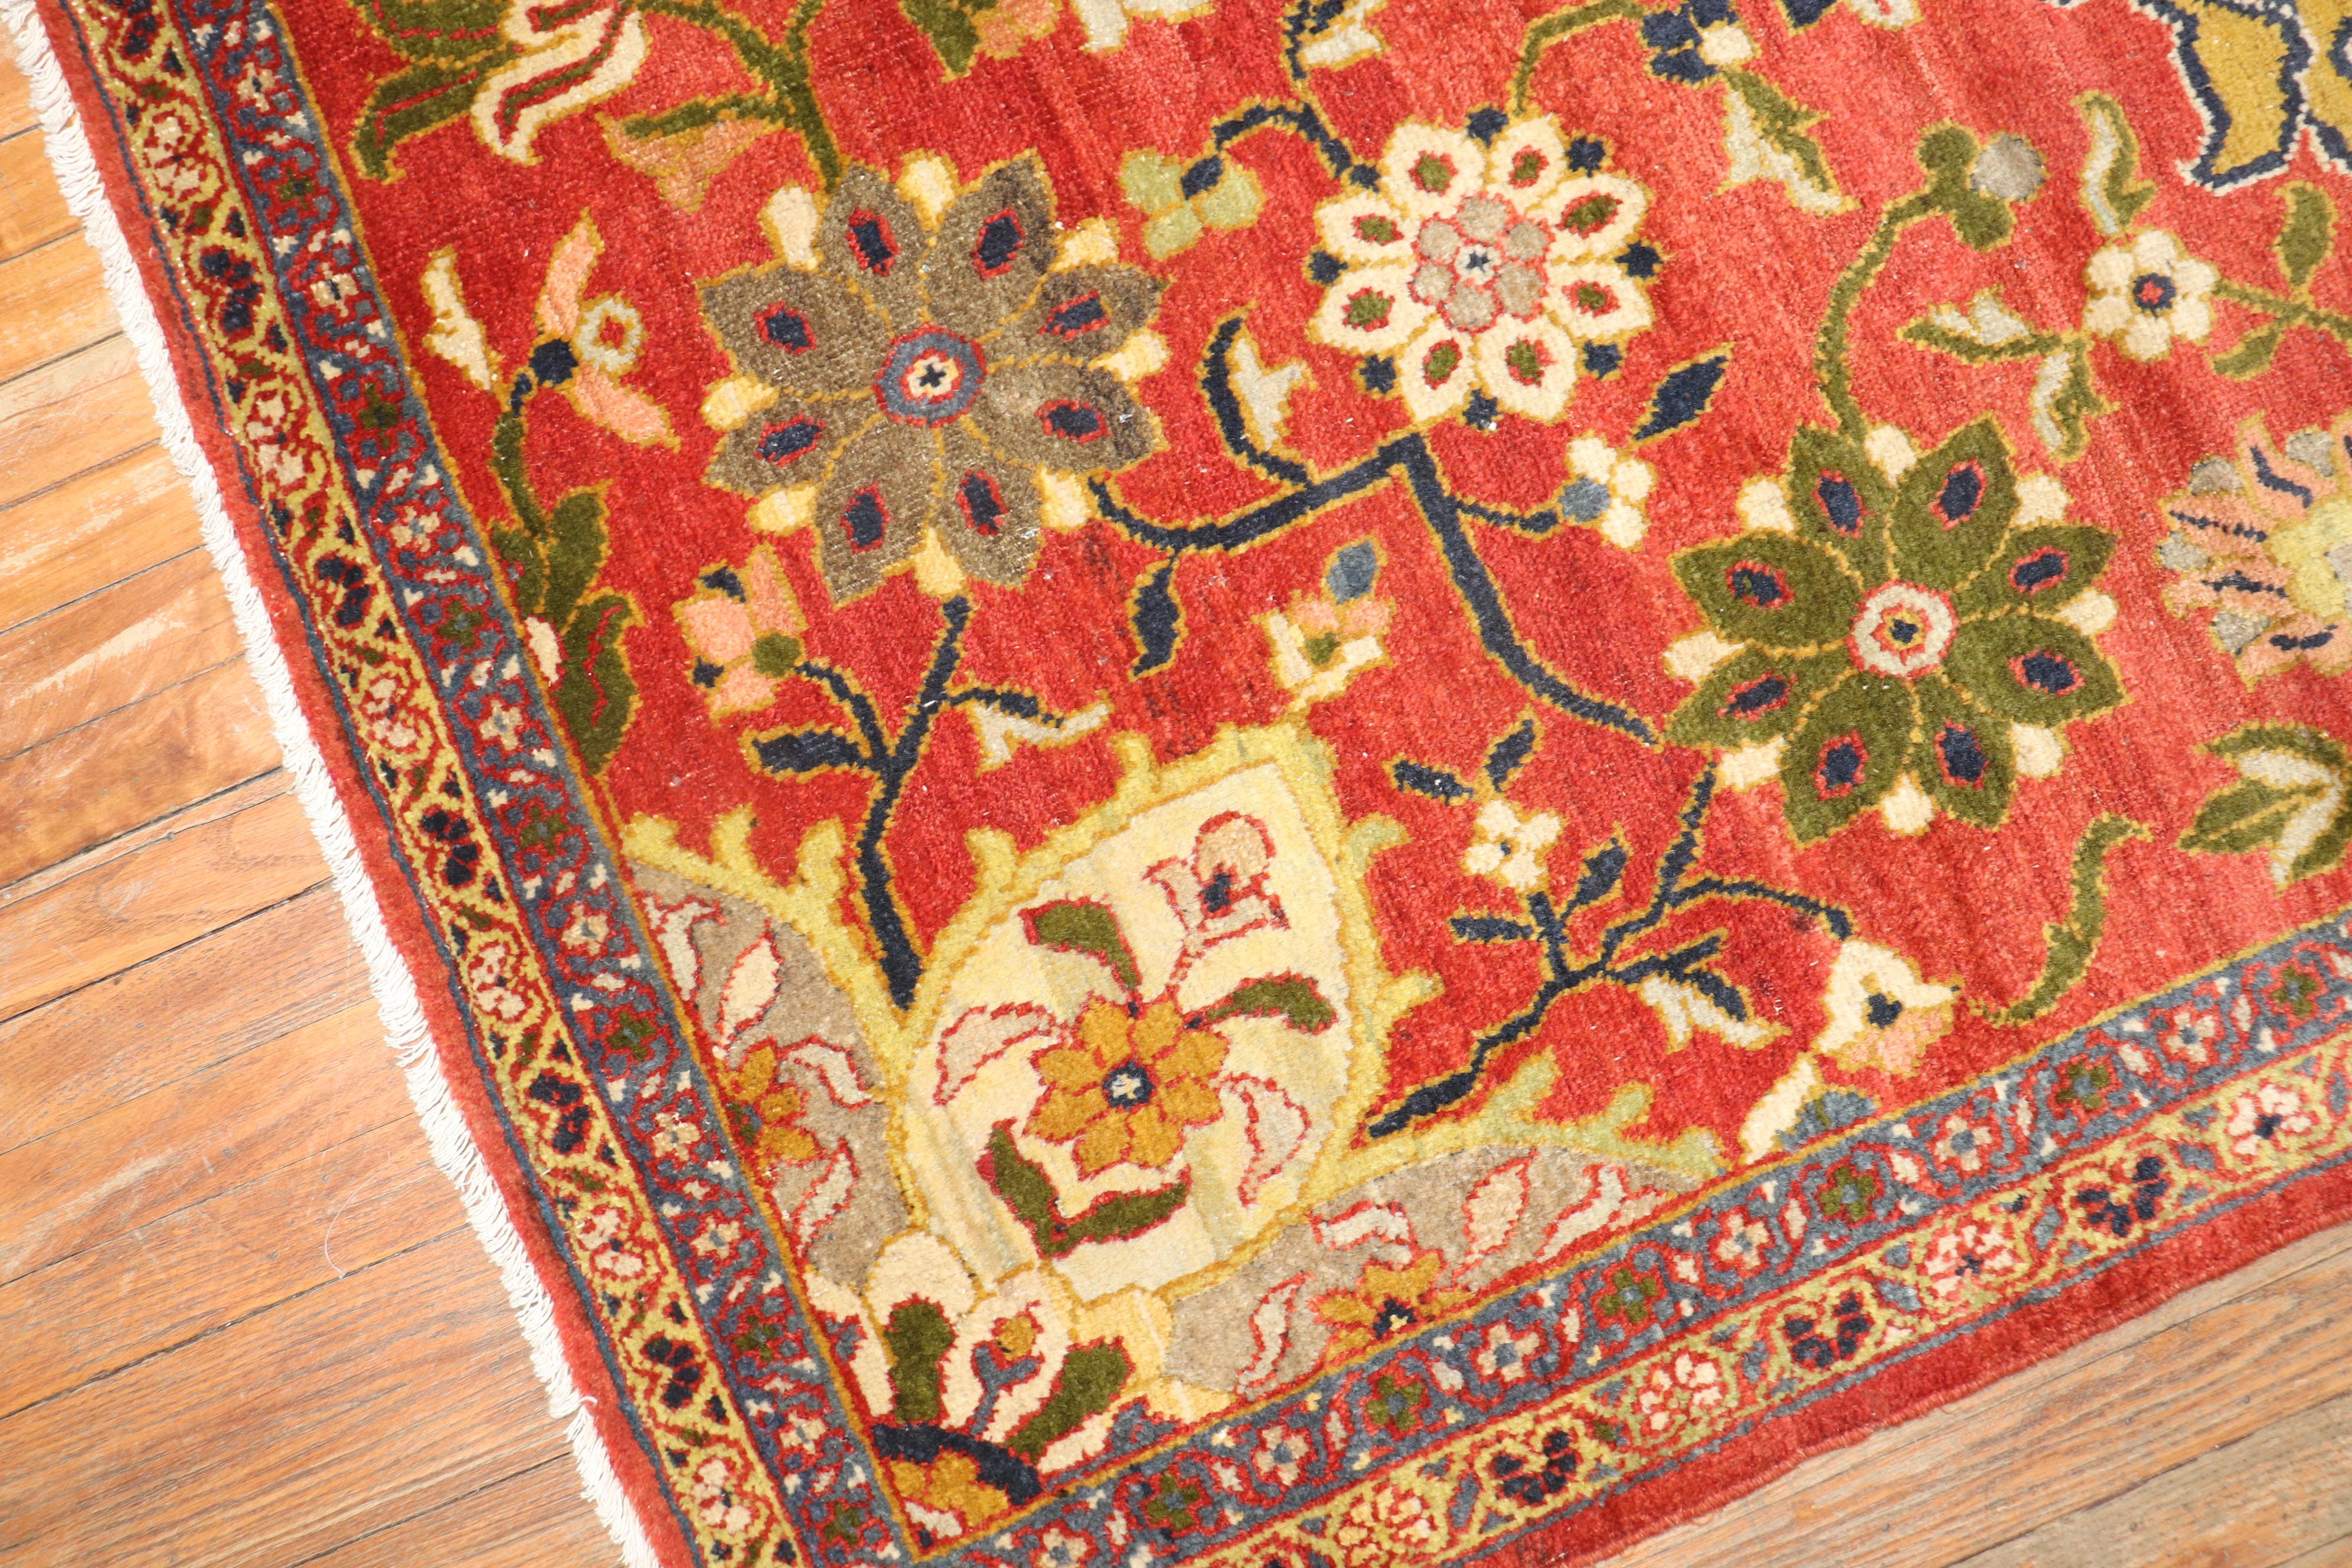 Magnificent Antique Persian Sultanabad Sampler 19th Century Rug In Good Condition For Sale In New York, NY